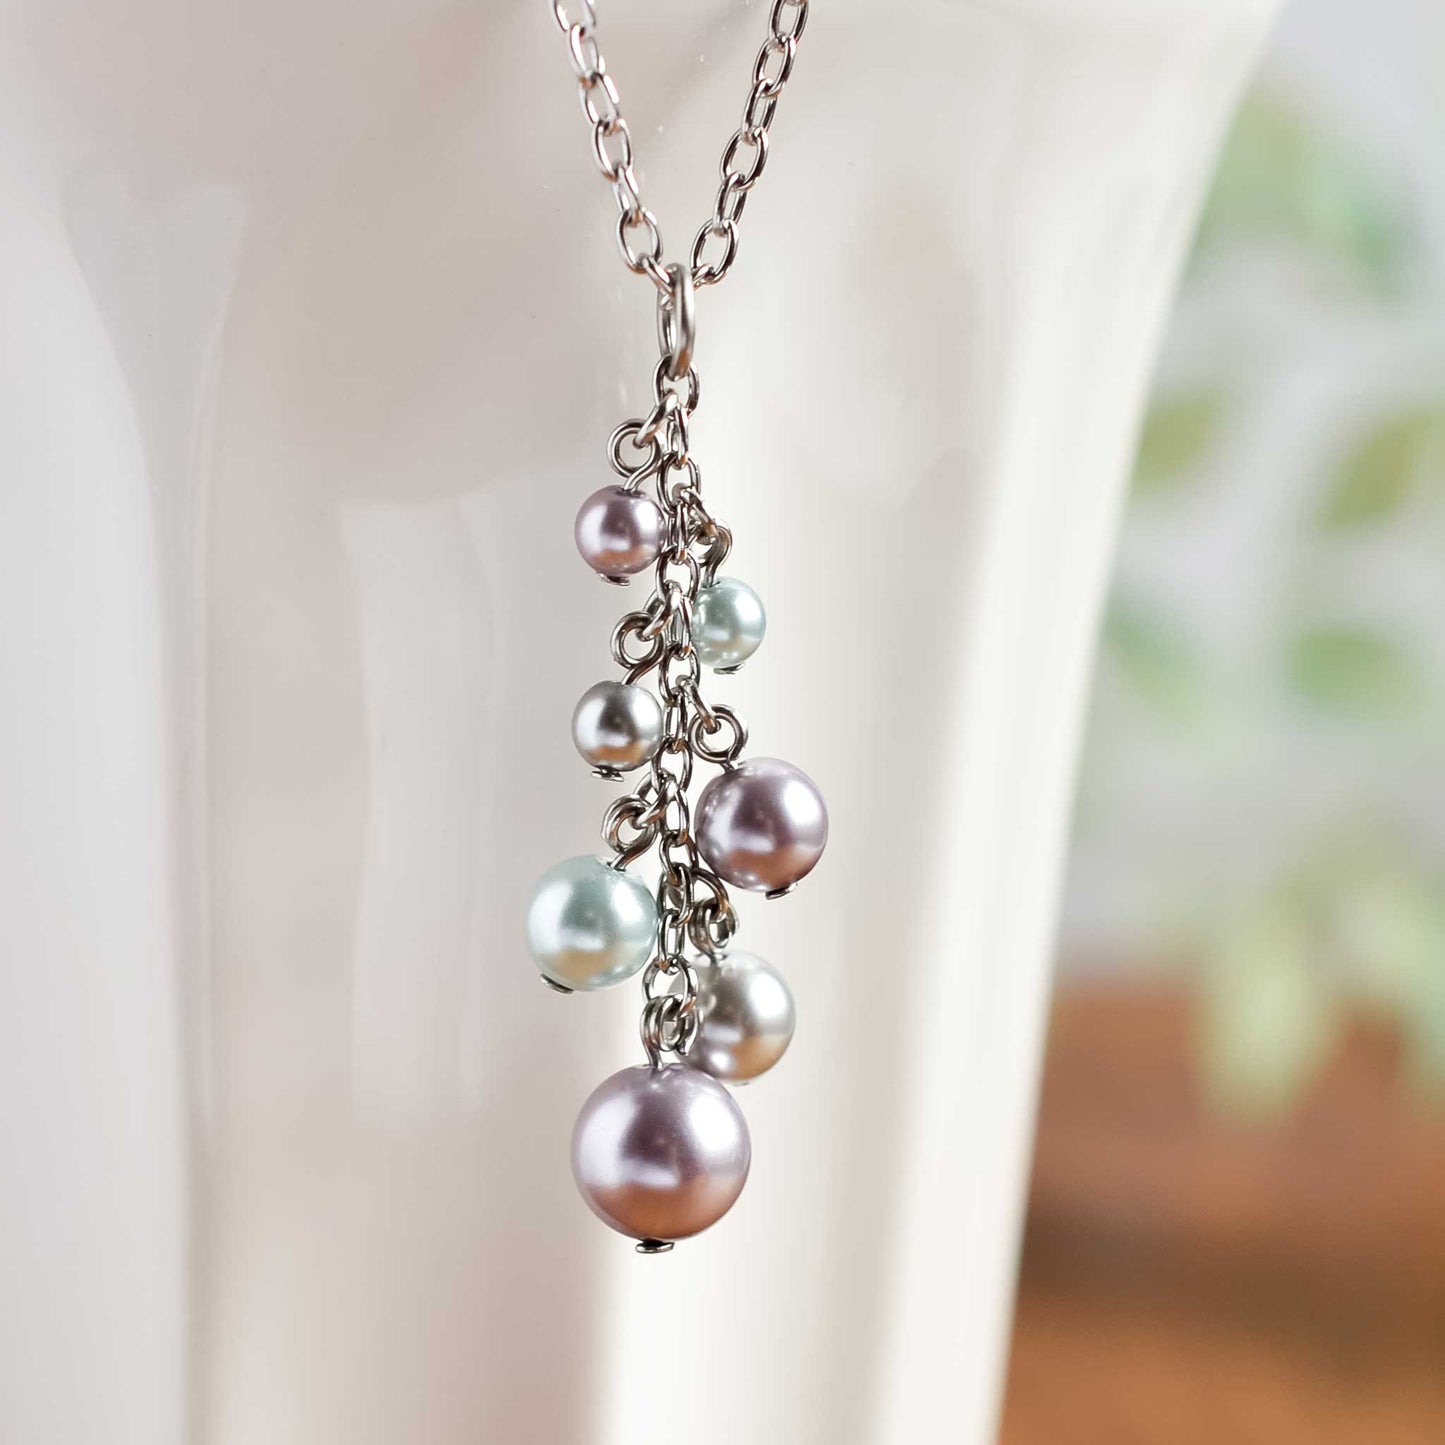 Faux pearl cluster pendant hanging from white cup